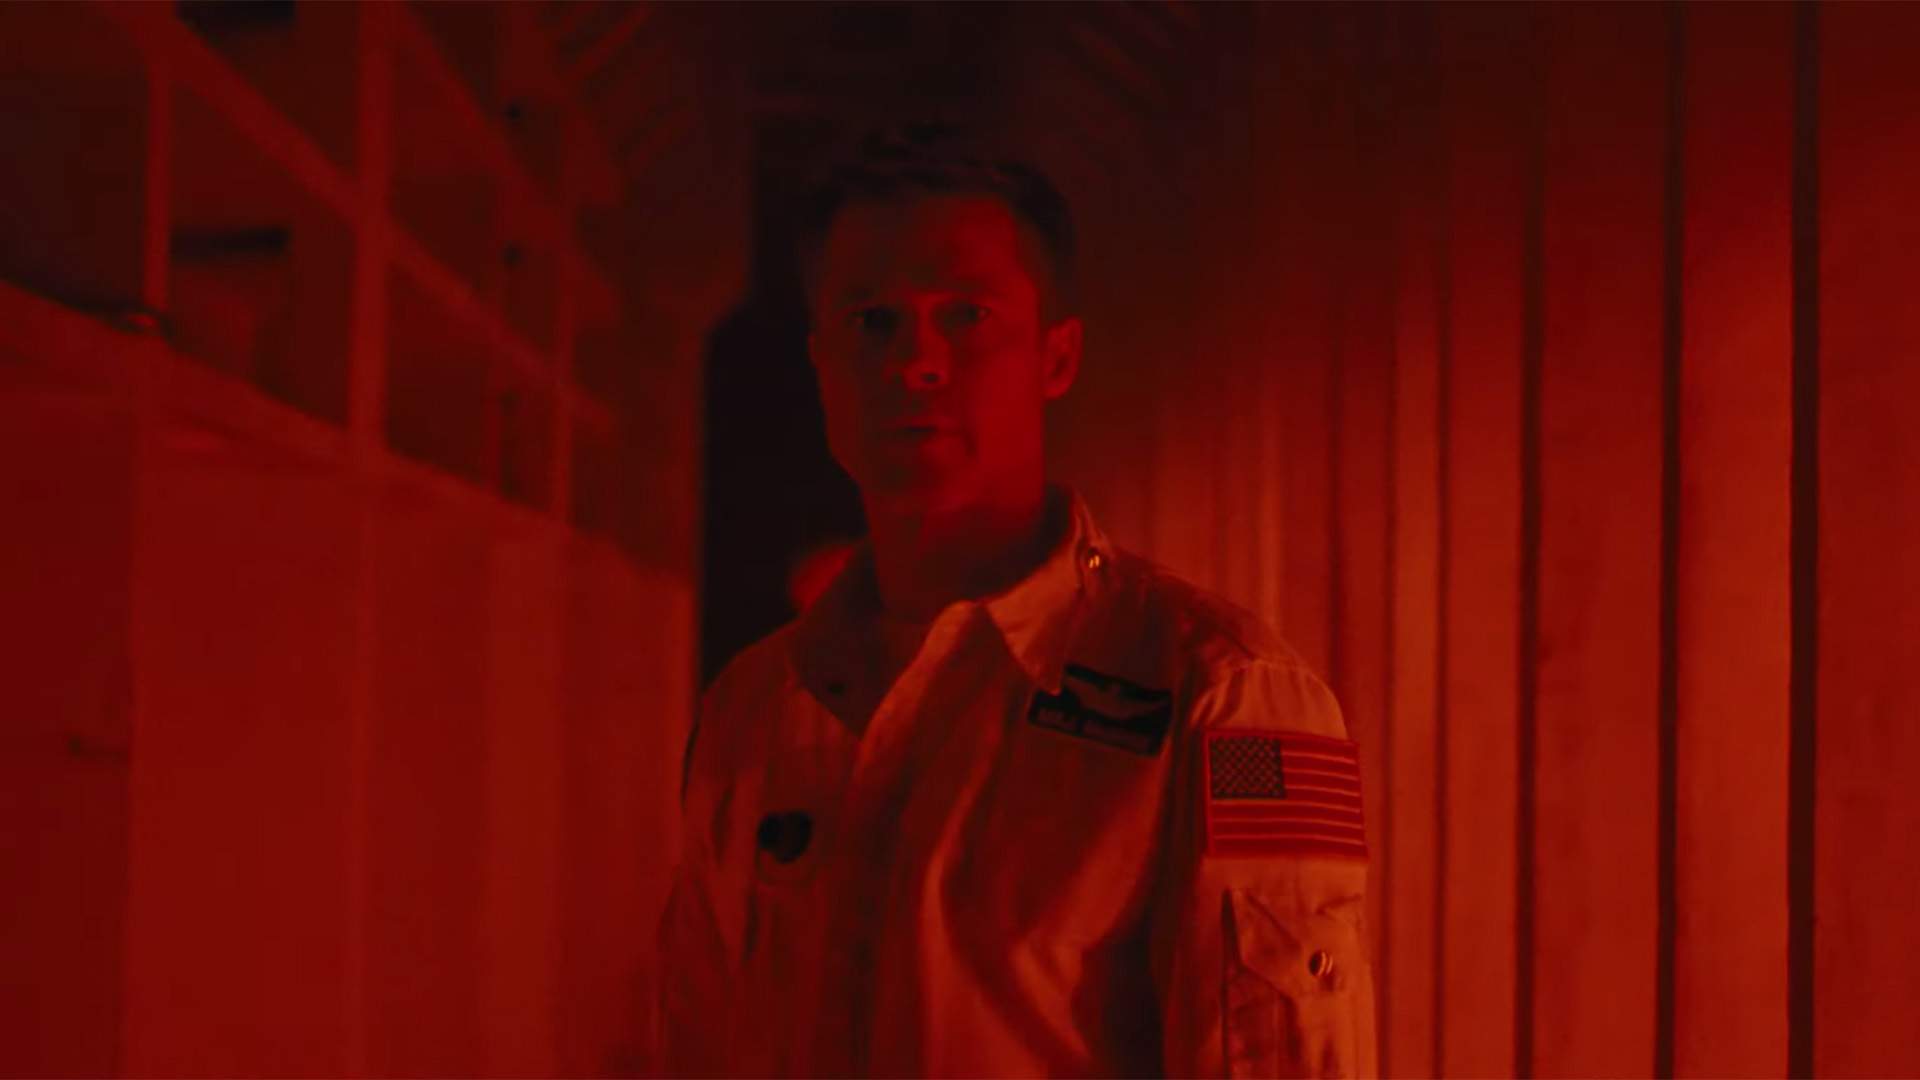 Brad Pitt Blasts Into Space in the First Trailer for the New Interplanetary Thriller 'Ad Astra'